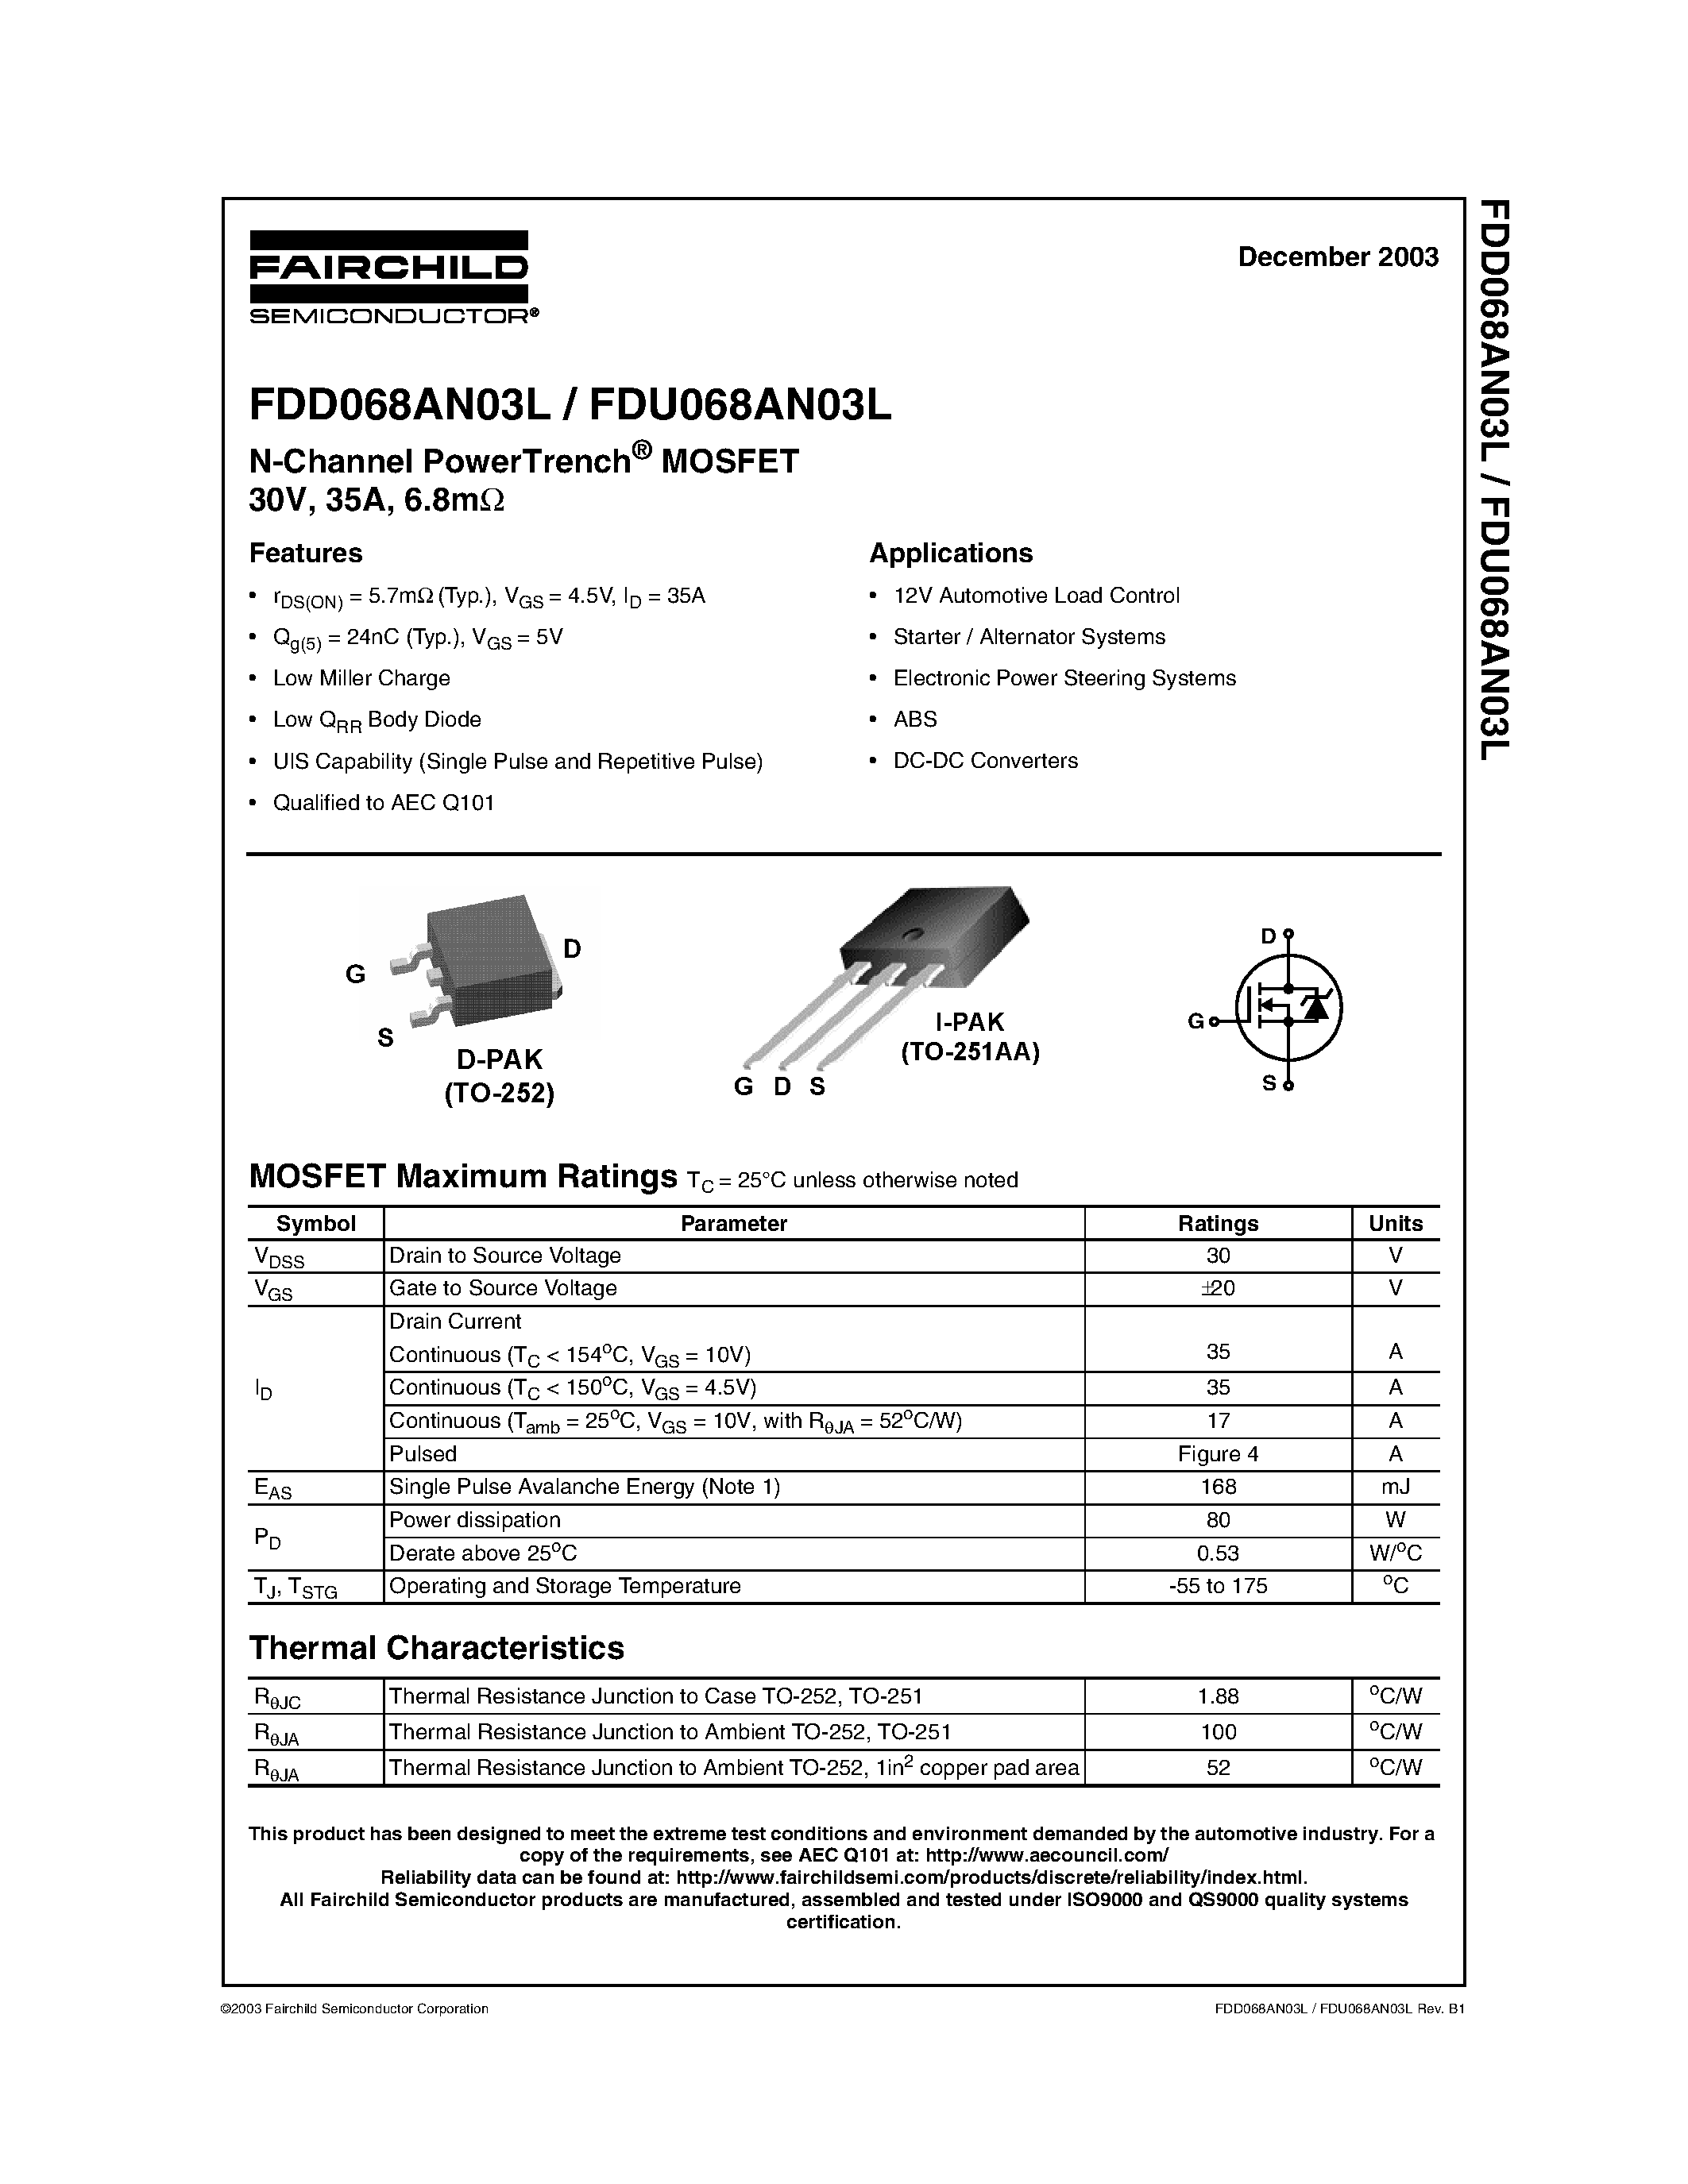 Даташит FDD068AN03L - N-Channel PowerTrench MOSFET 30V/ 35A/ 6.8m страница 1